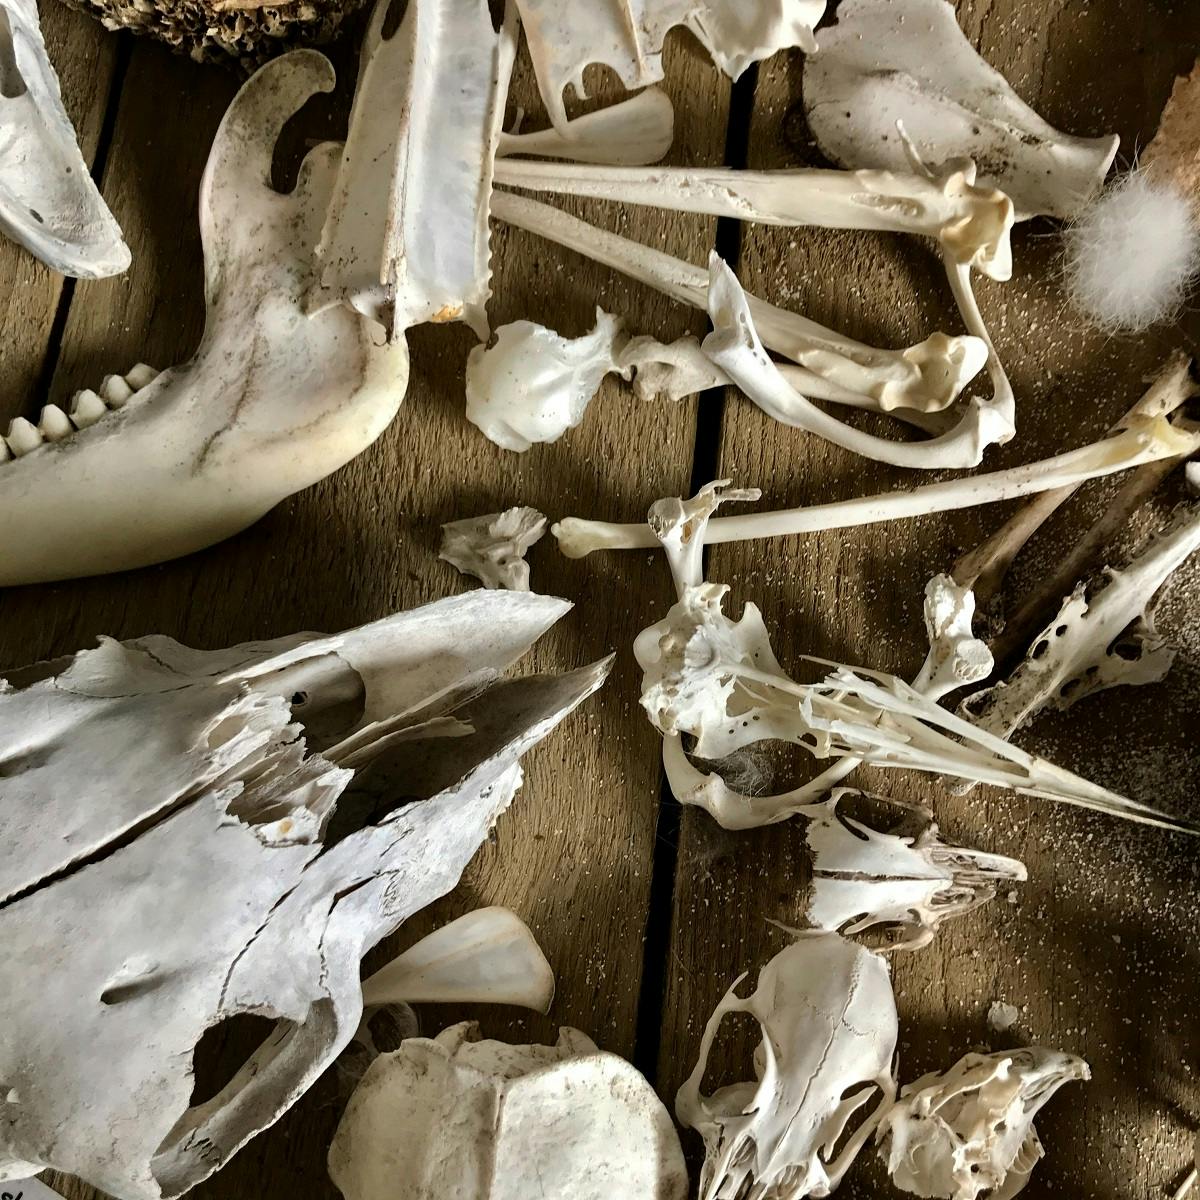 A collection of wildlife bones and skulls depicting the sixth mass extinction. 